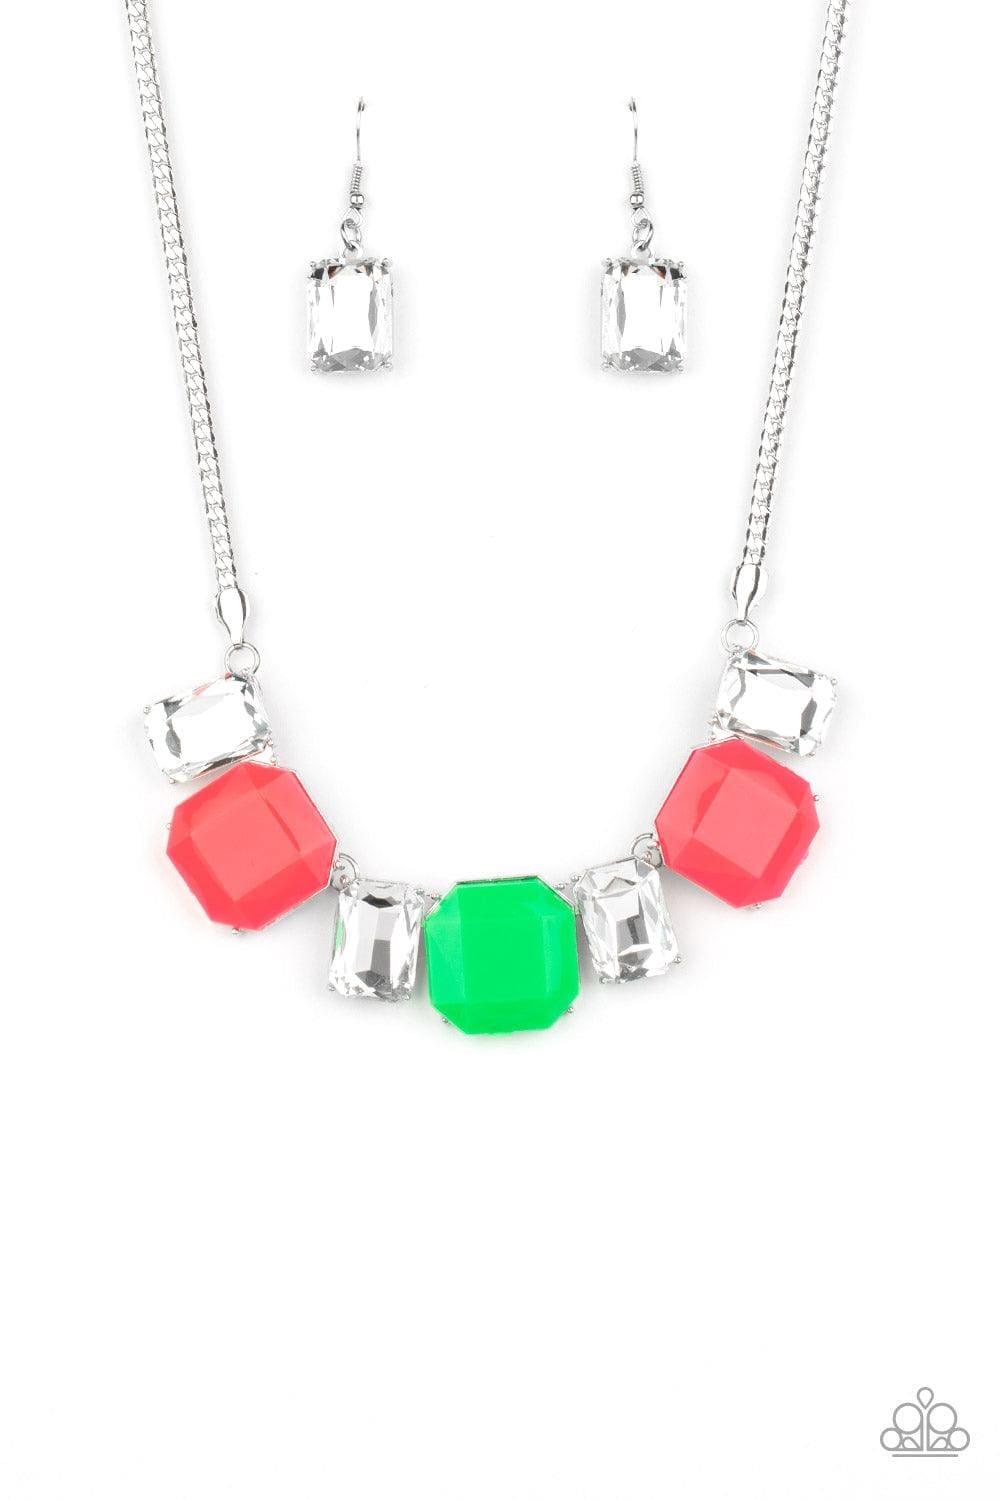 Paparazzi Accessories - Royal Crest - Pink (neon) Necklace - Bling by JessieK